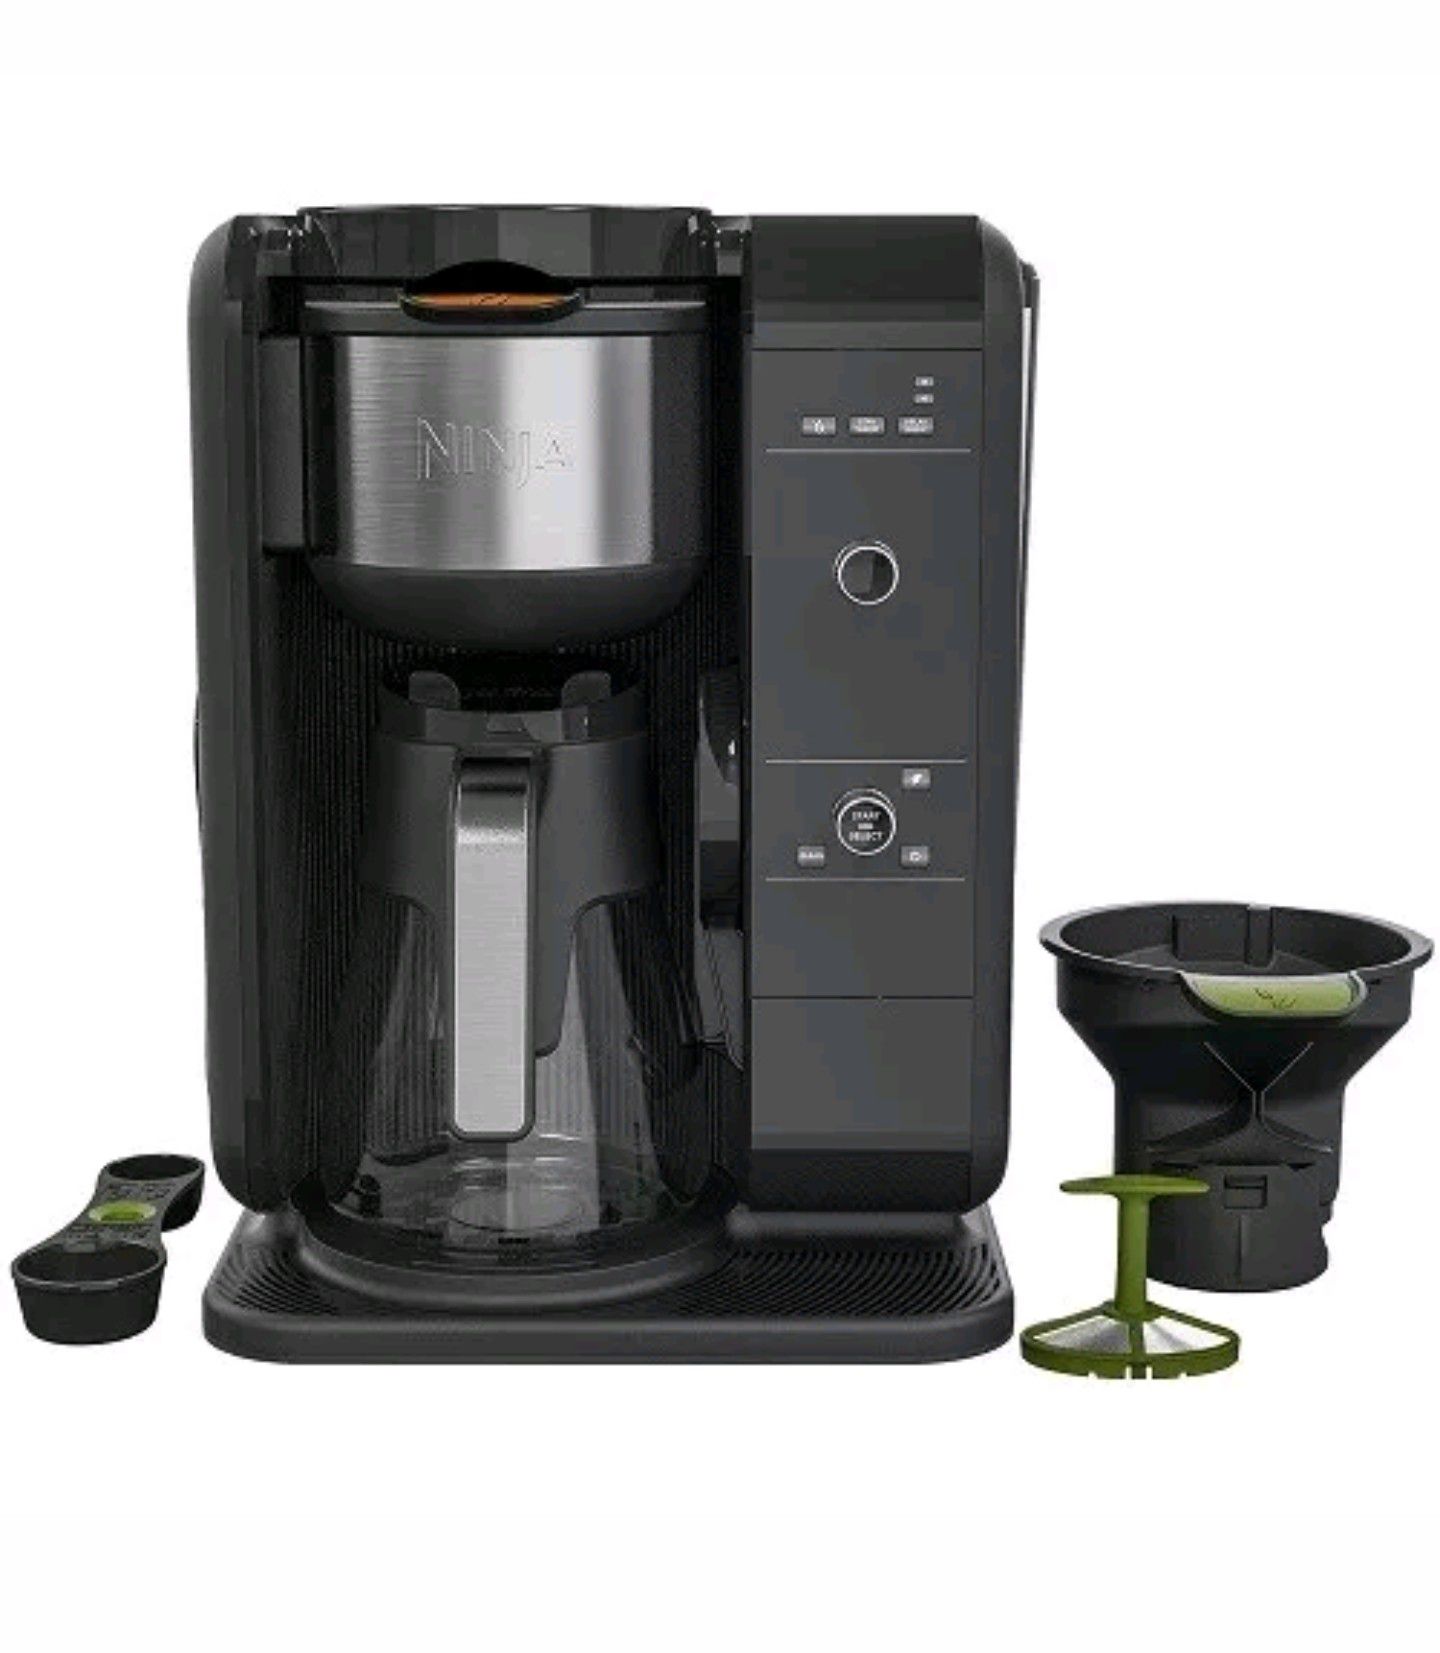 Ninja CP301A Hot & Cold Brewed System Coffee Maker